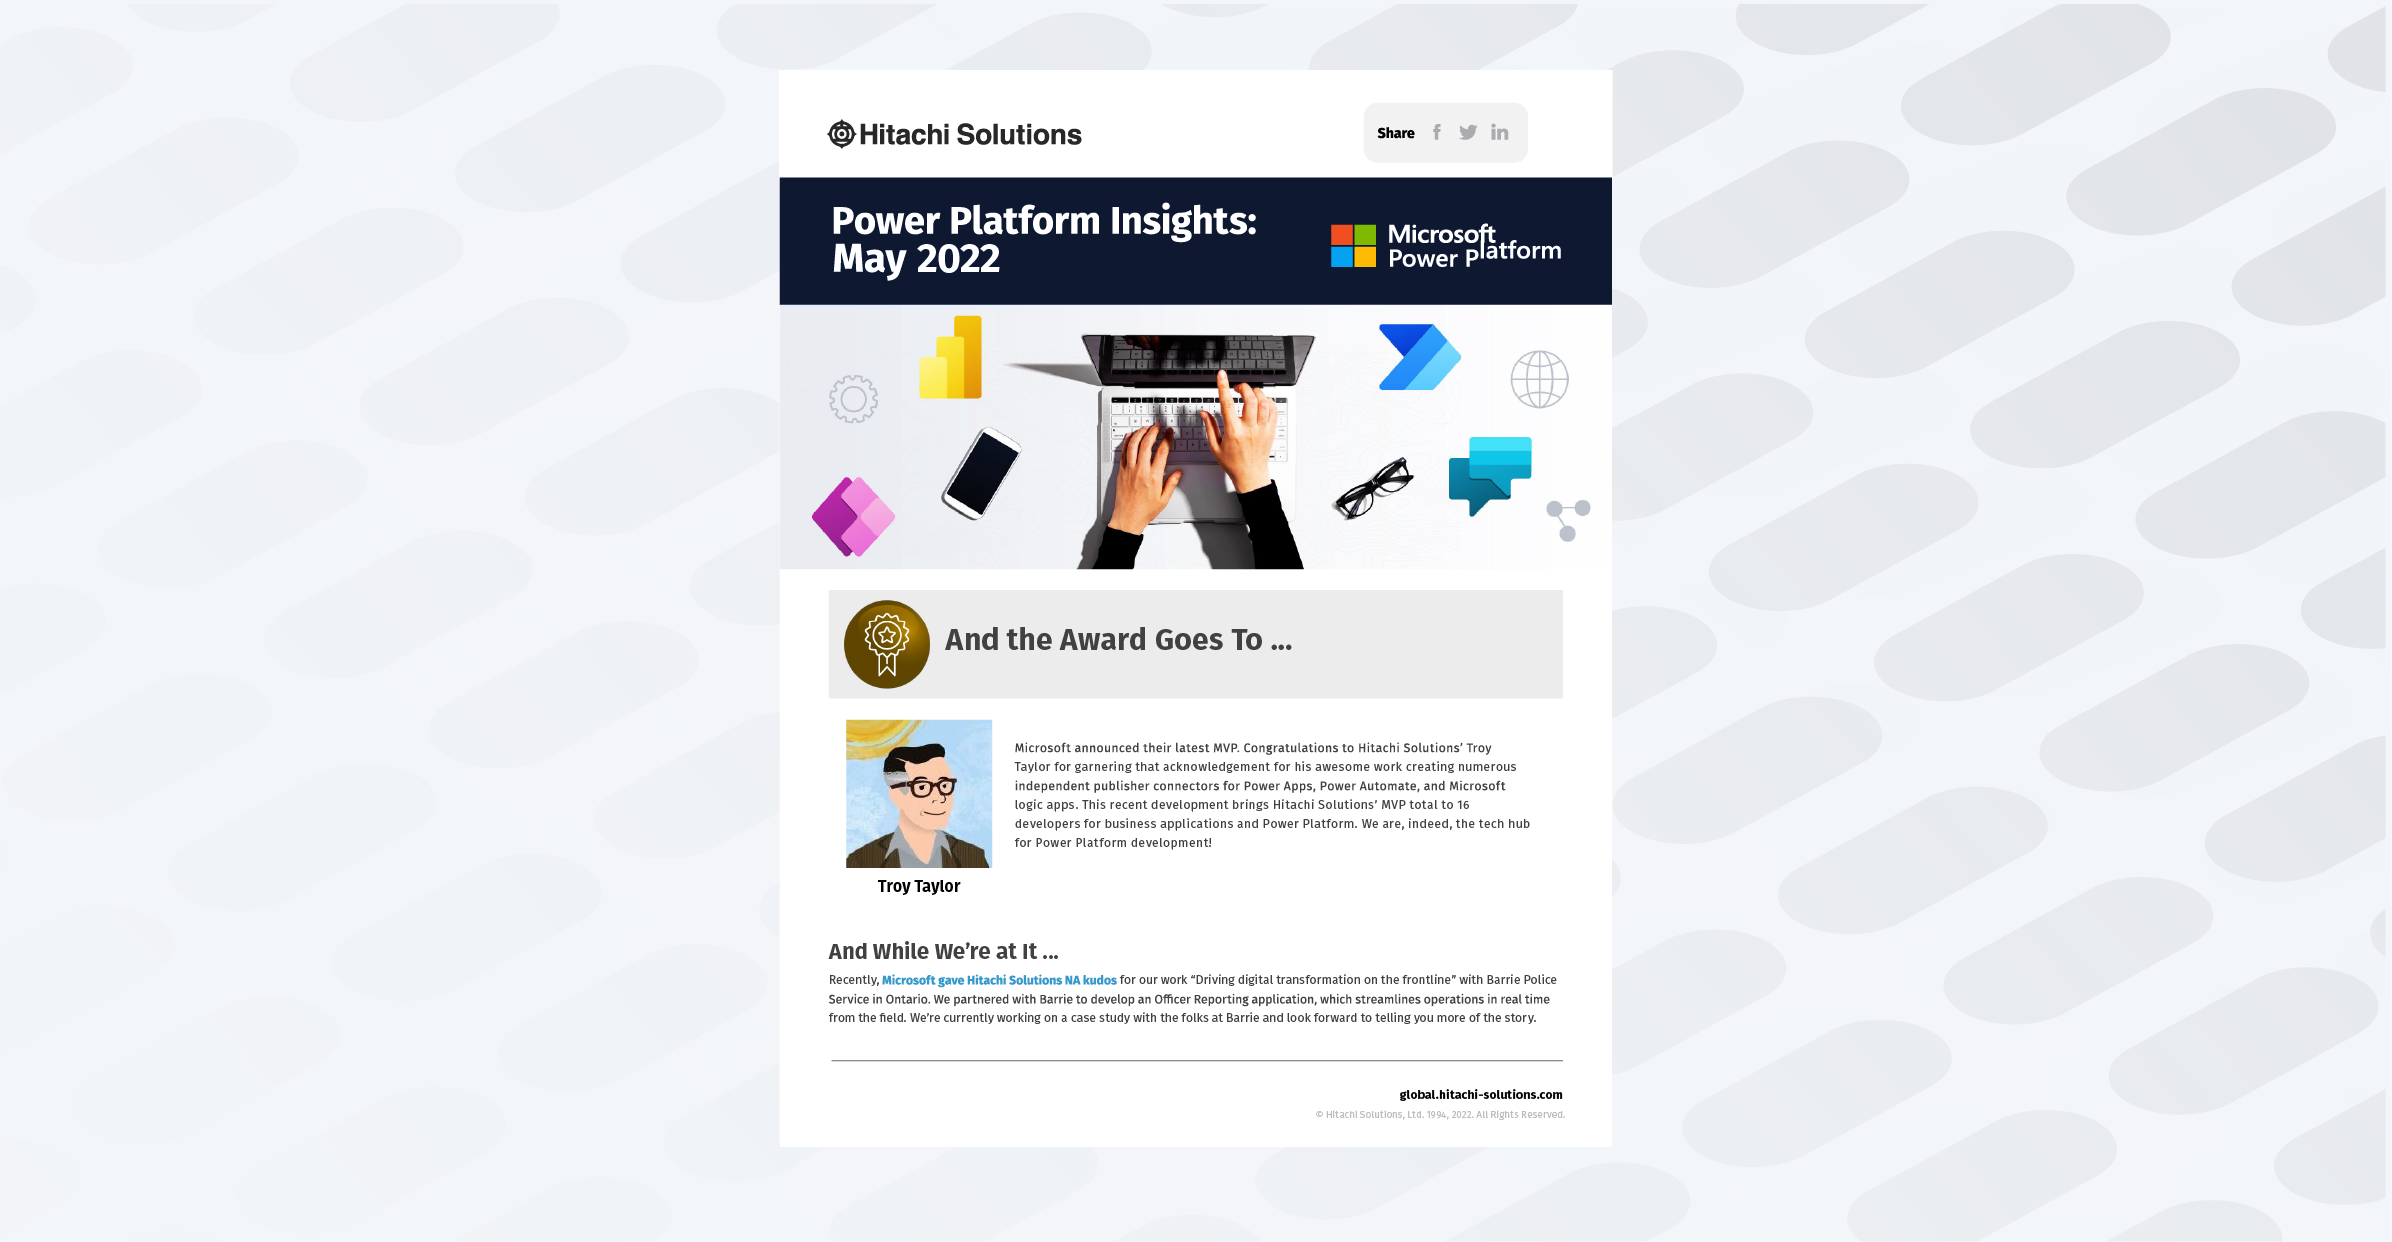 Power Platform Insights May 2022 infographic